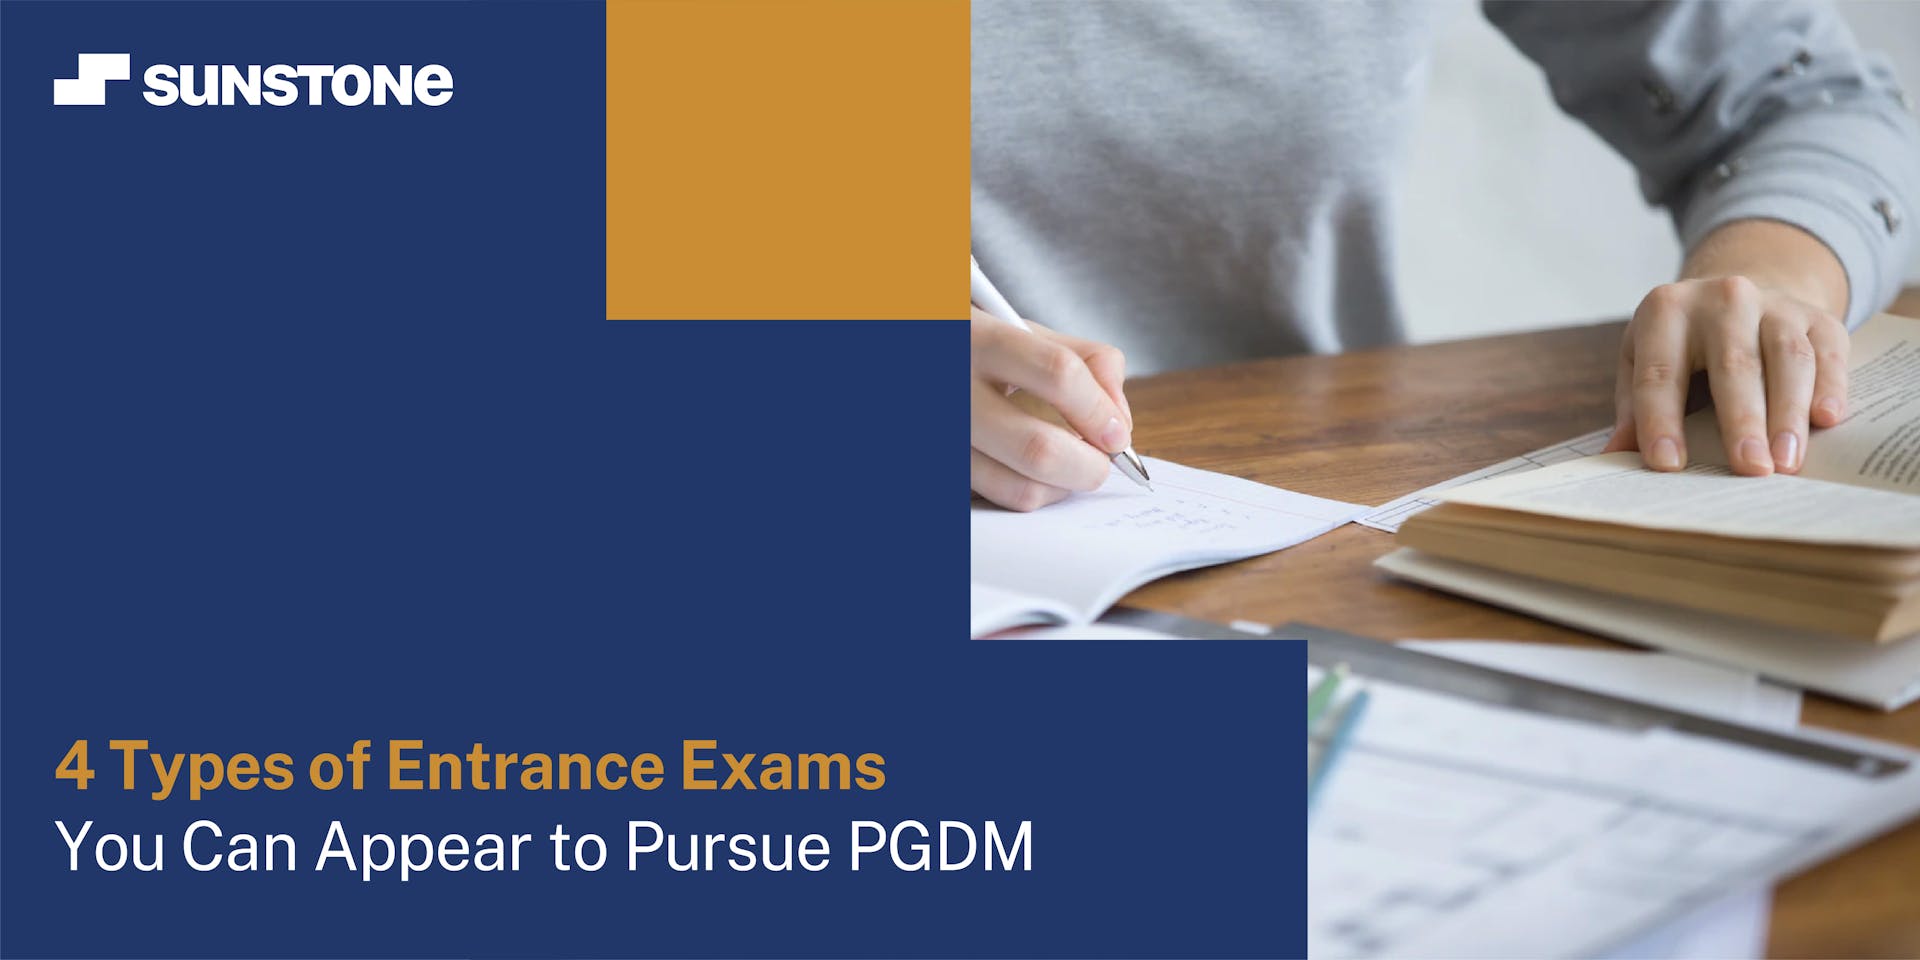 4 types of entrance exams you can appear for to pursue PGDM